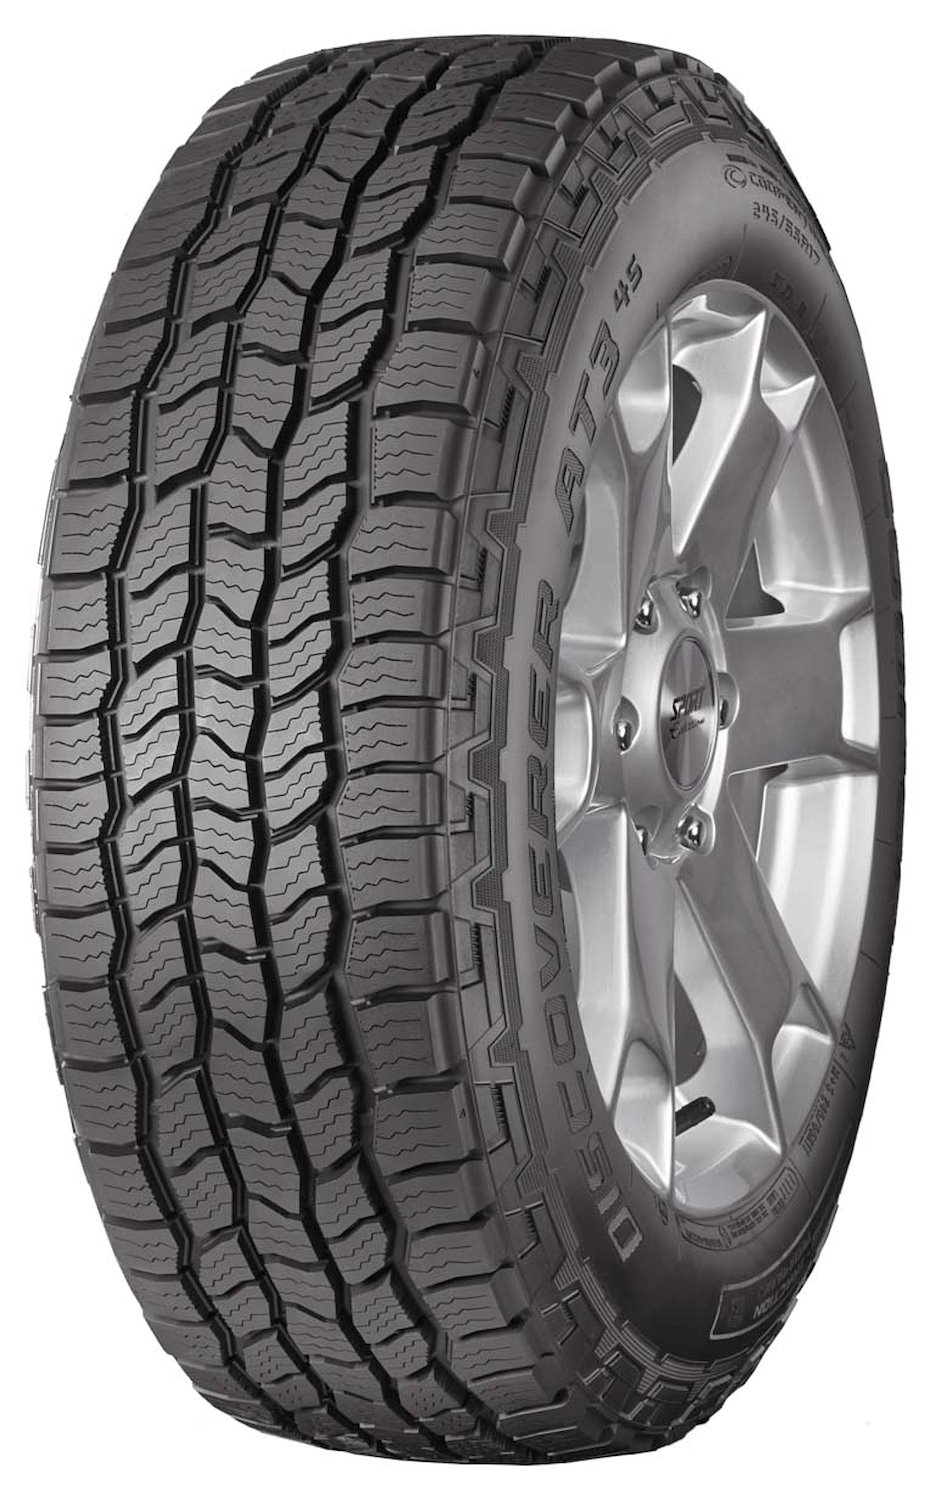 Discoverer AT3 4S All-Terrain Tire, 245/70R16